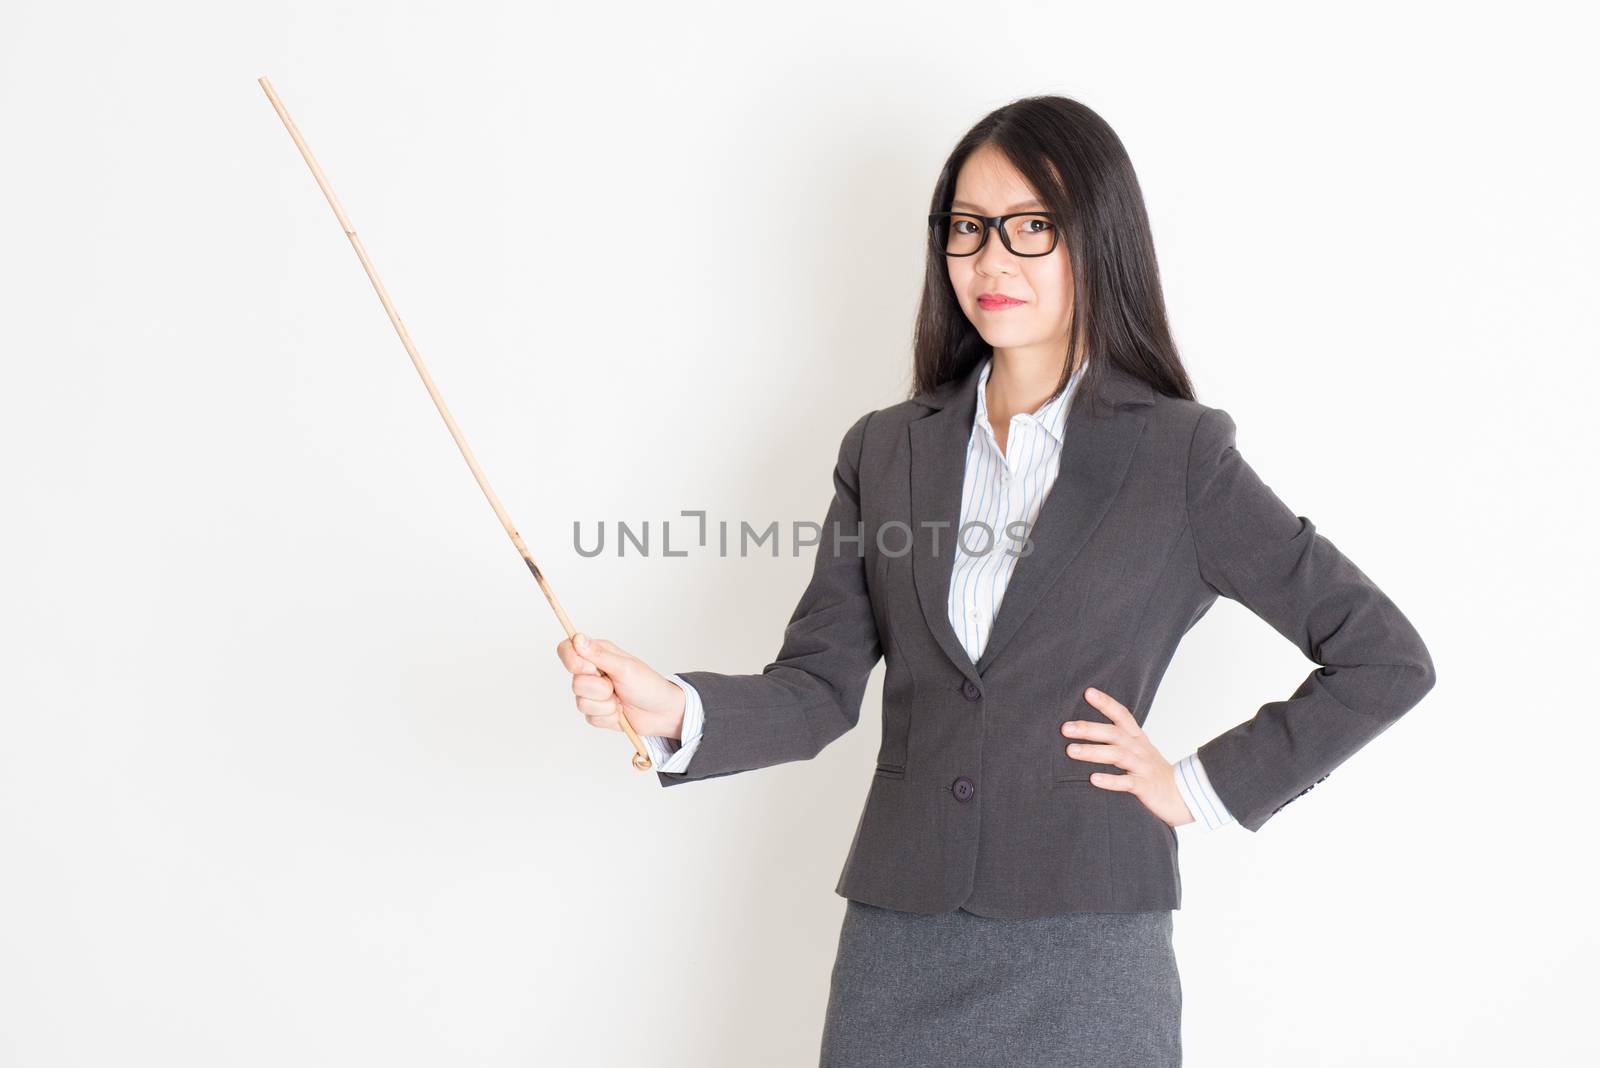 Asian female teacher hand holding a cane in class lesson, standing on plain background.